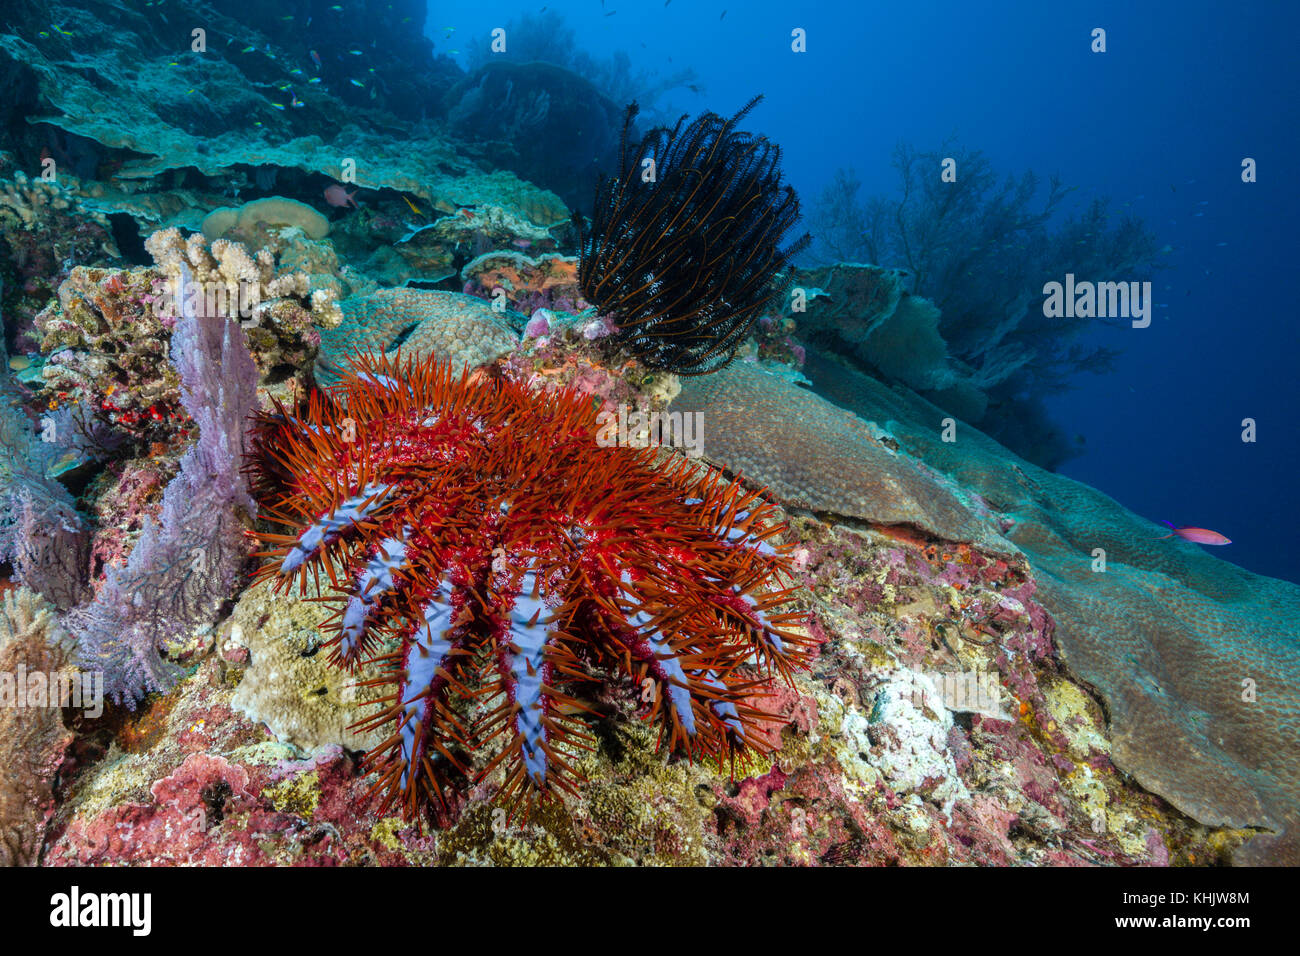 Crown-of-Thorns Starfish in Coral Reef, Acanthaster planci, Christmas Island, Australia Stock Photo